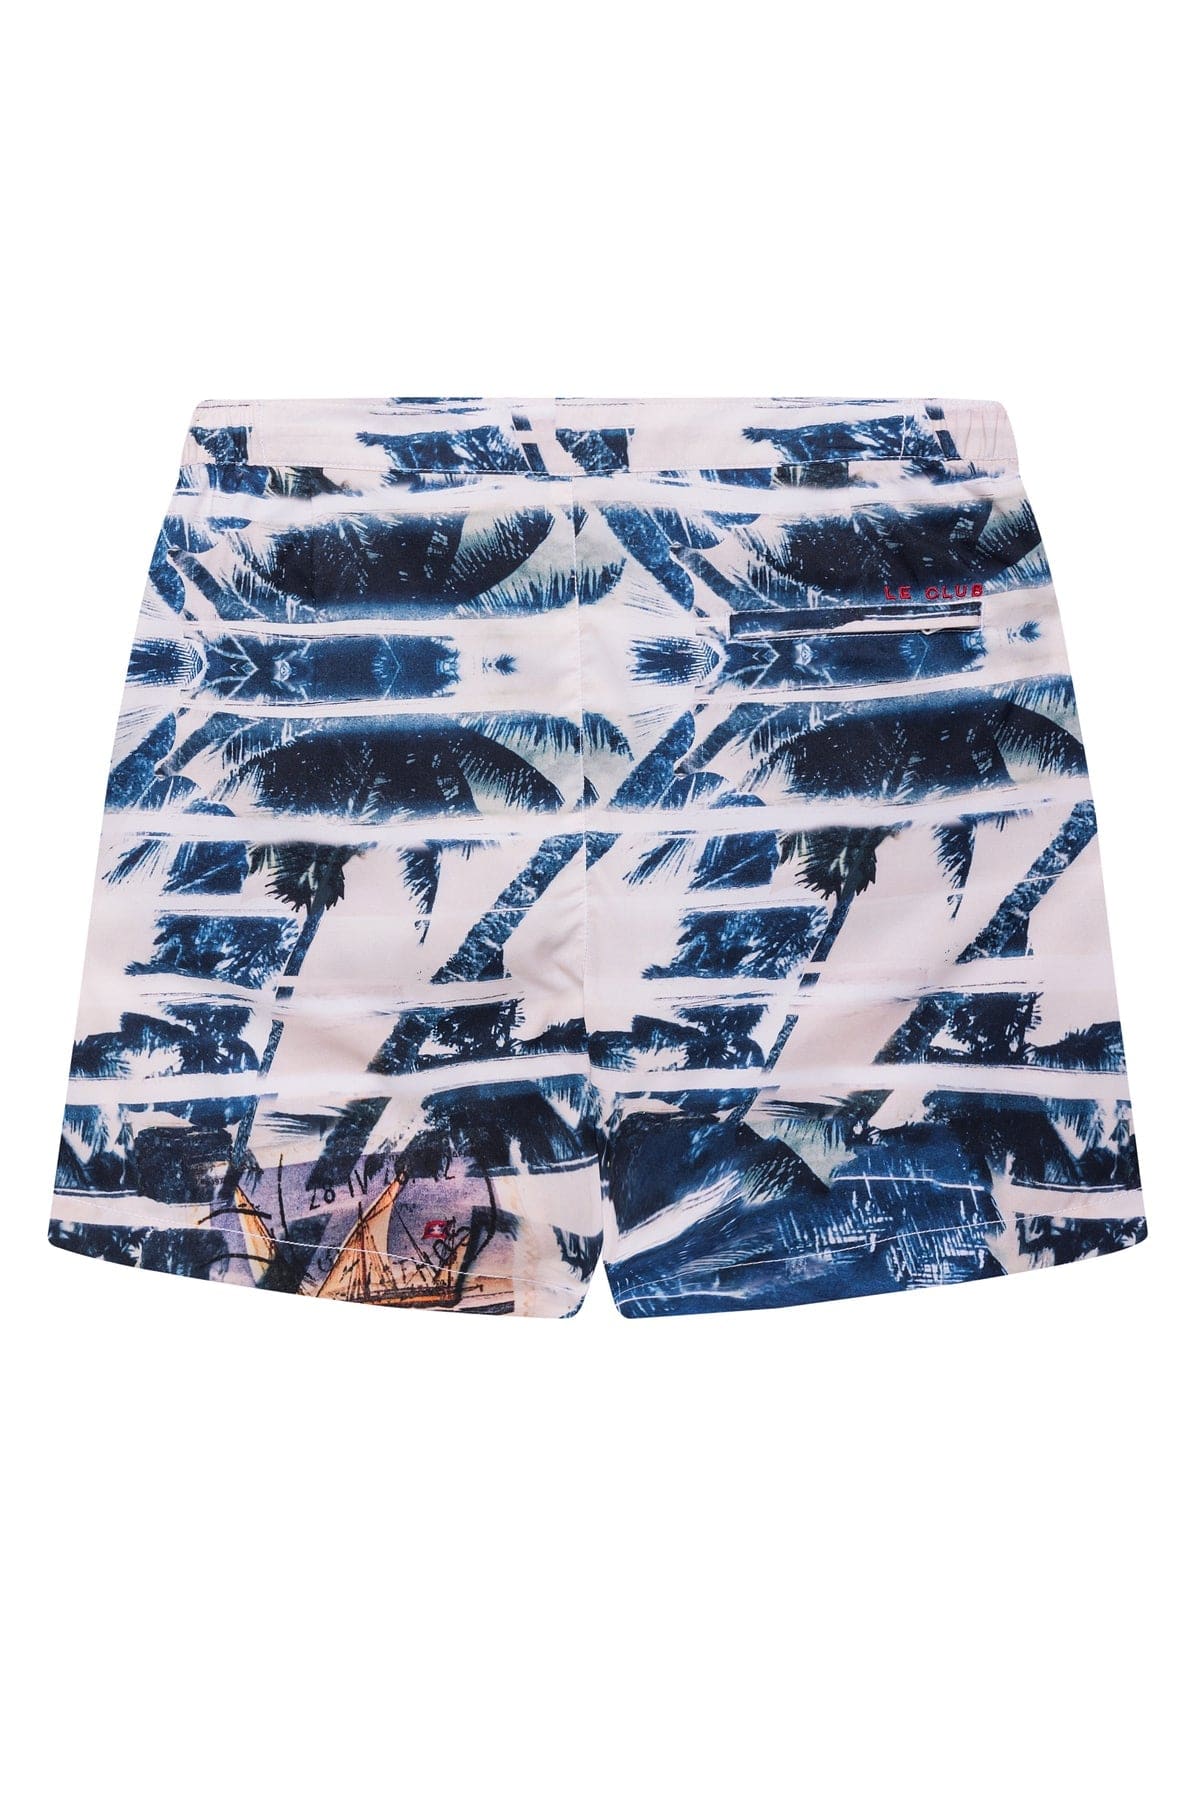 Le Club Apparel & Accessories > Clothing > Shorts Club Men's Swim Trunk Islands 2022 Le Club Men's Swim Trunk Islands